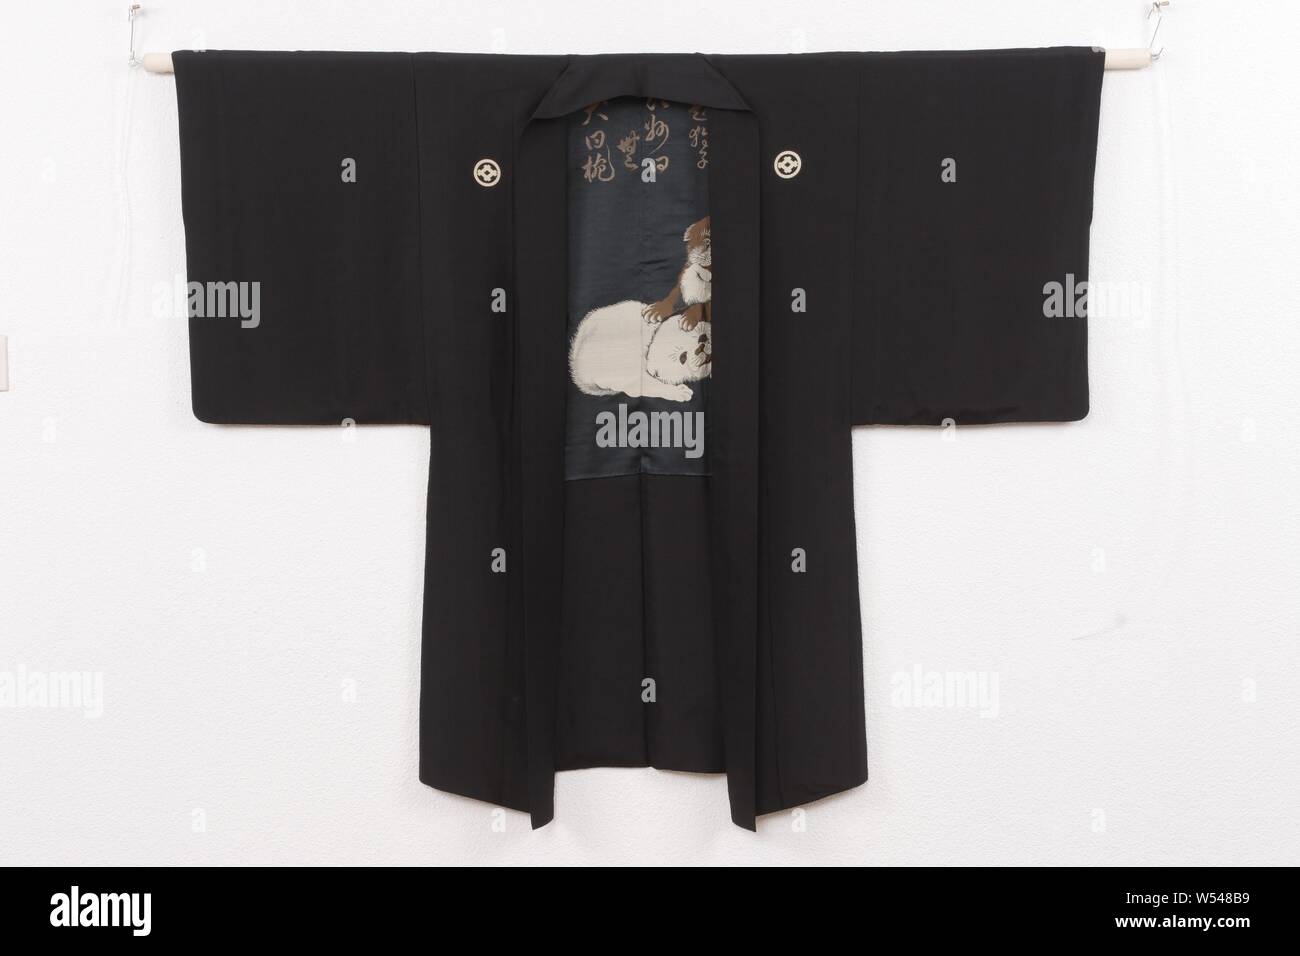 Men haori with poem and three young dogs, Haori for a man with a decoration on the lining of three playing young dogs, two brown and one white, with a poem above it by the priest Shaku Soen (1859-1919): 'Dai kushi, Joshu iwaku mu, inu iwaku wan' (About the puppy, Joshu says 'no', the dog says 'waf'), signature 'Ryogakutsu Soen', seal 'En'. It is a reference to the question of the Chinese zen priest Joshu (778-897) 'kushi bussho' ('has a puppy the Buddha nature'), to which he answered 'mu' ('non-something'). The 'waf' of the dog, 'wan' is written with the character for soup bowl, also 'wan', as Stock Photo